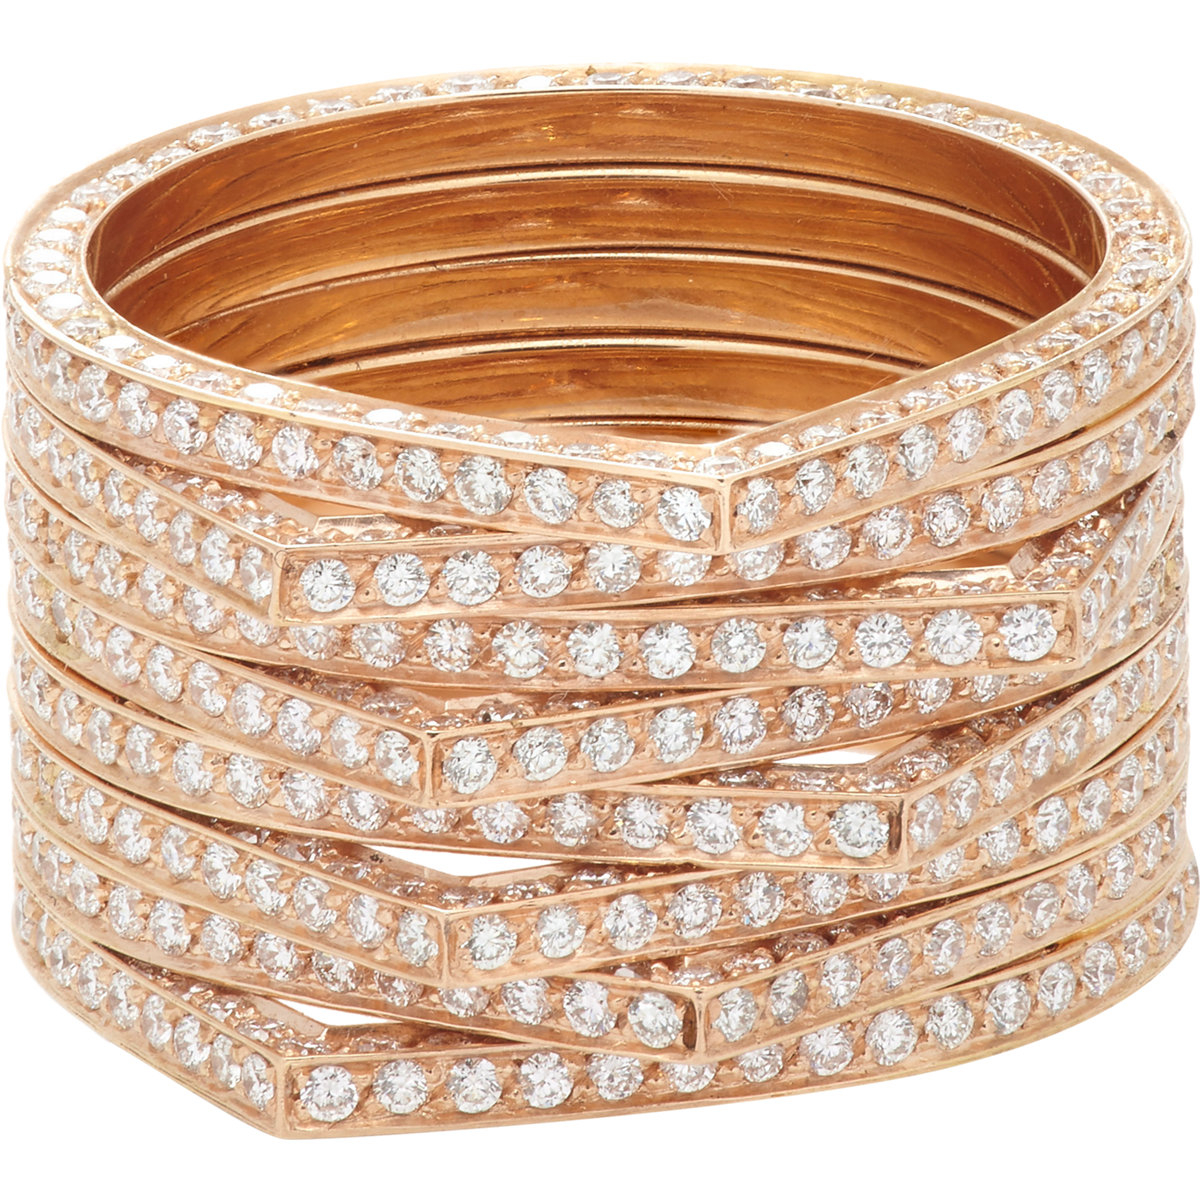 repossi-none-diamond-rose-gold-eight-row-antifer-ring-pink-product-2-665775754-normal